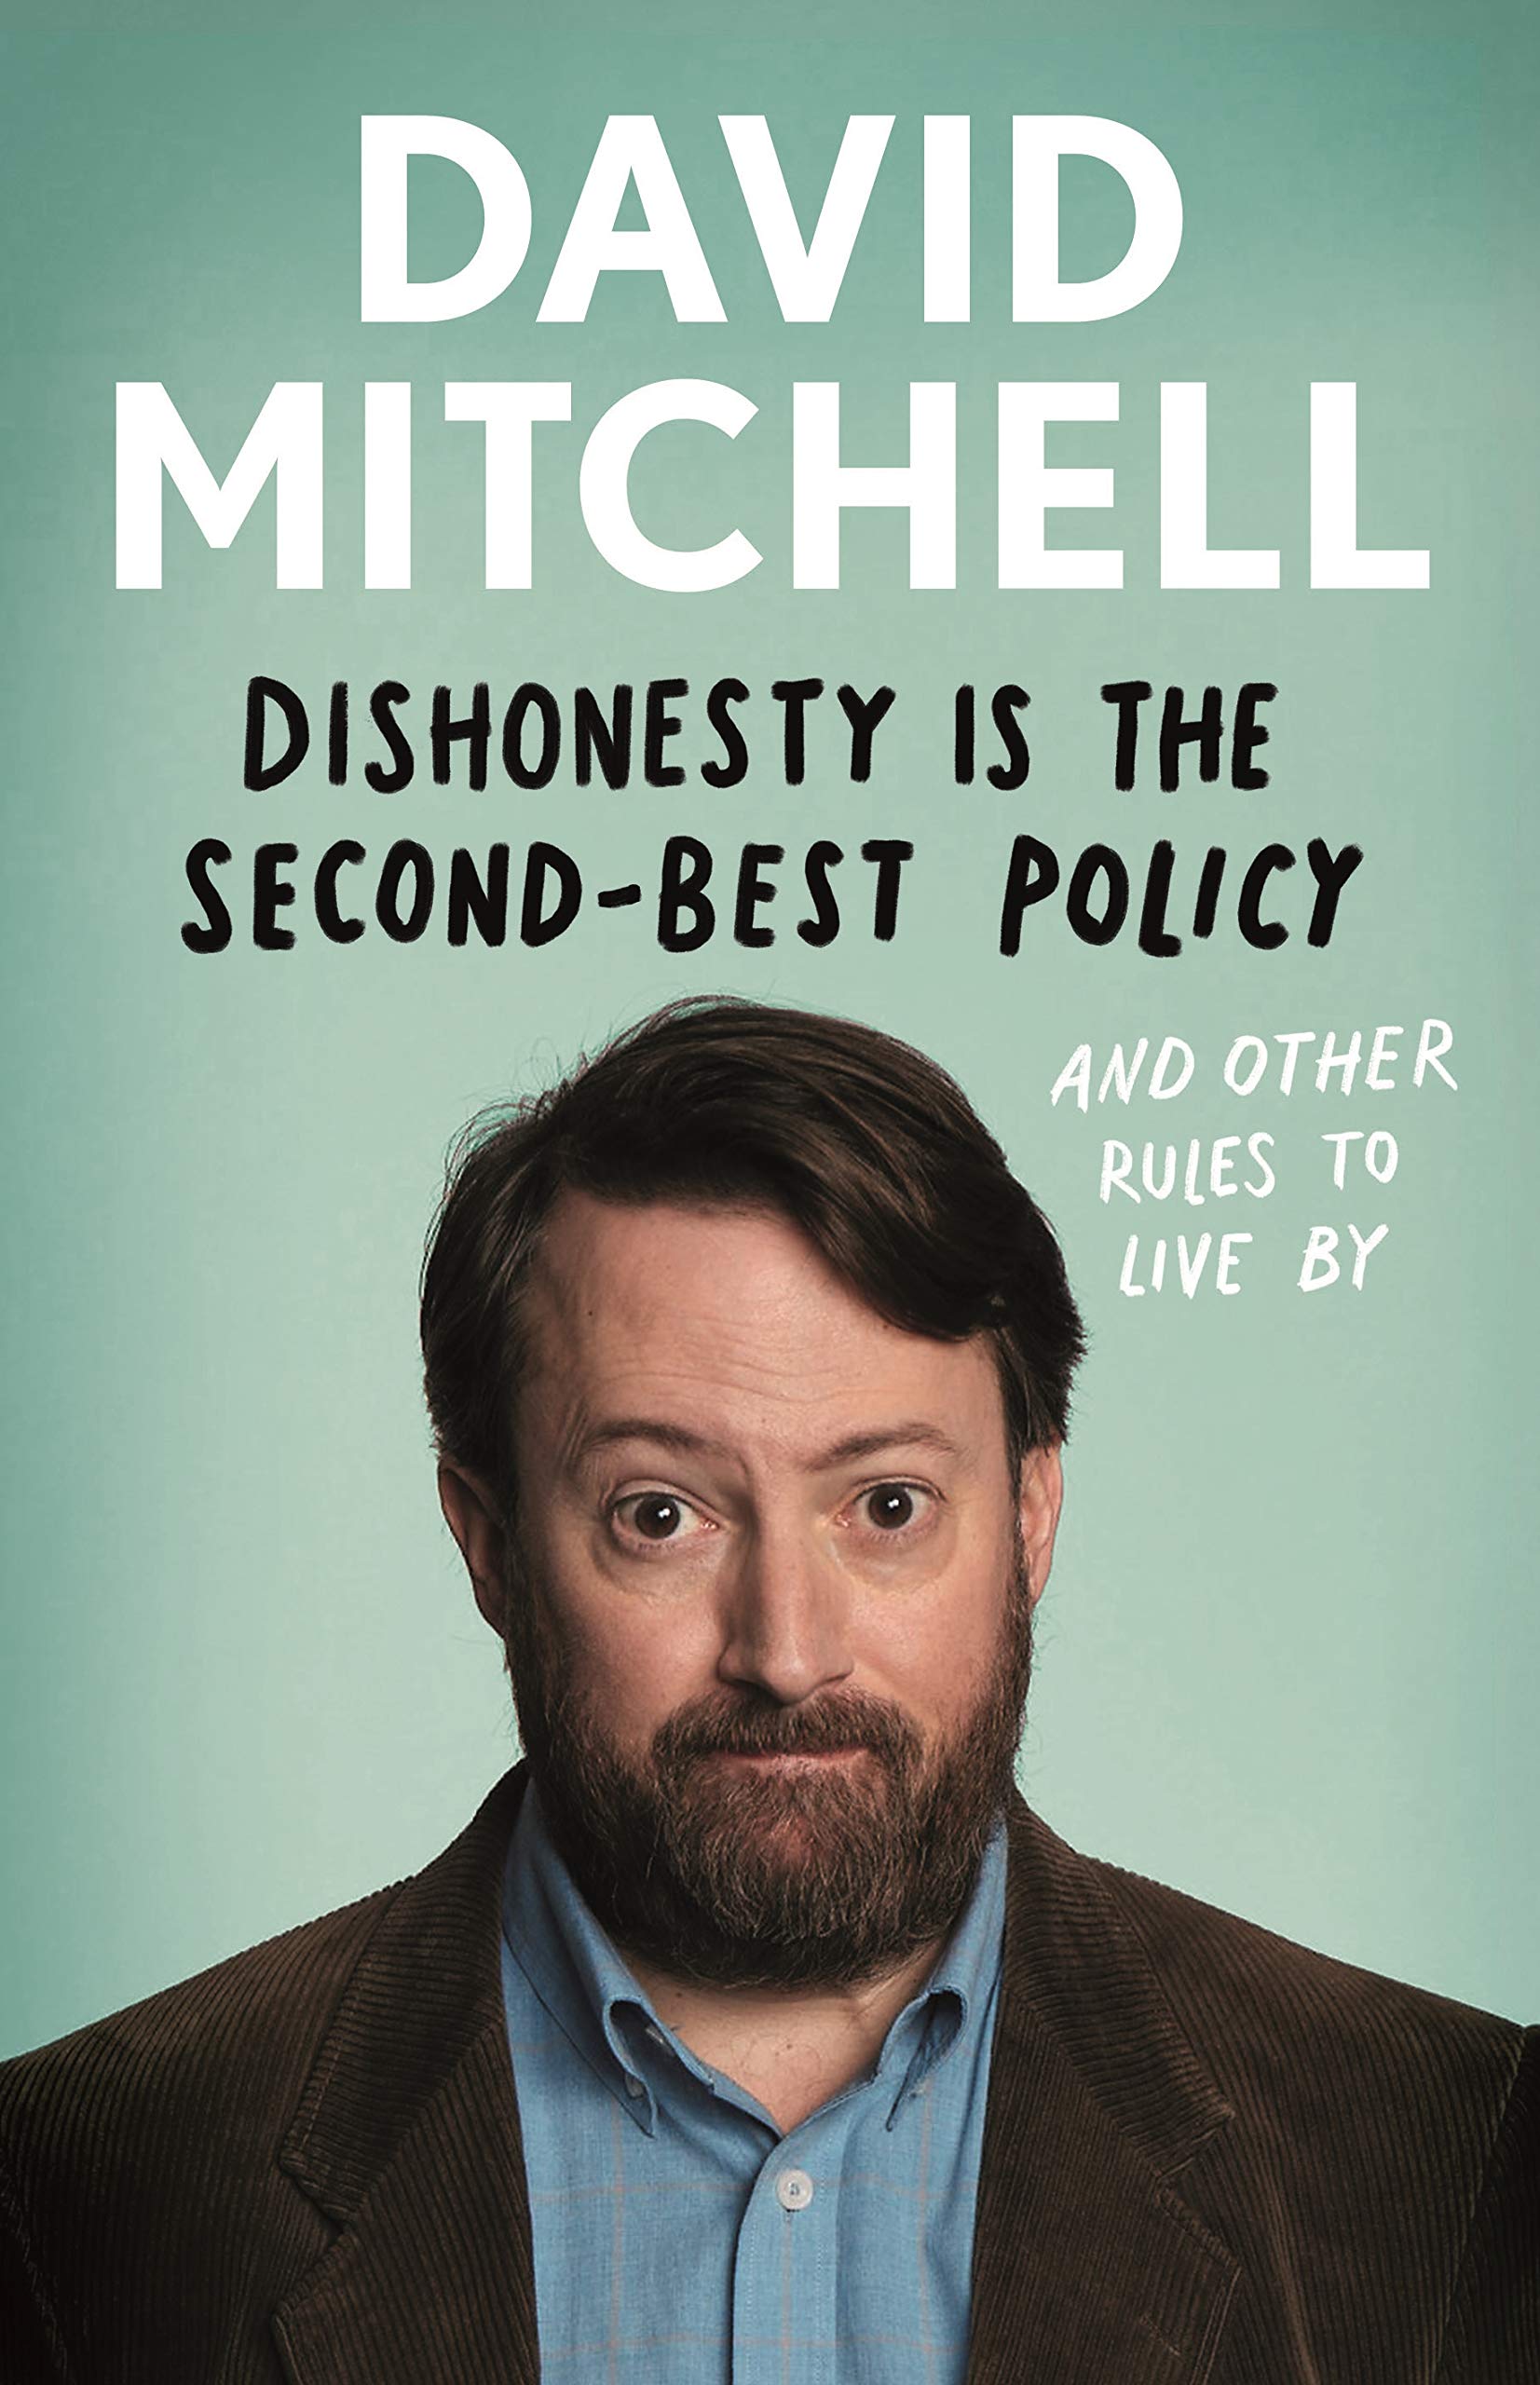 boom reviews - David Mitchell – Dishonesty is the Second-Best Policy